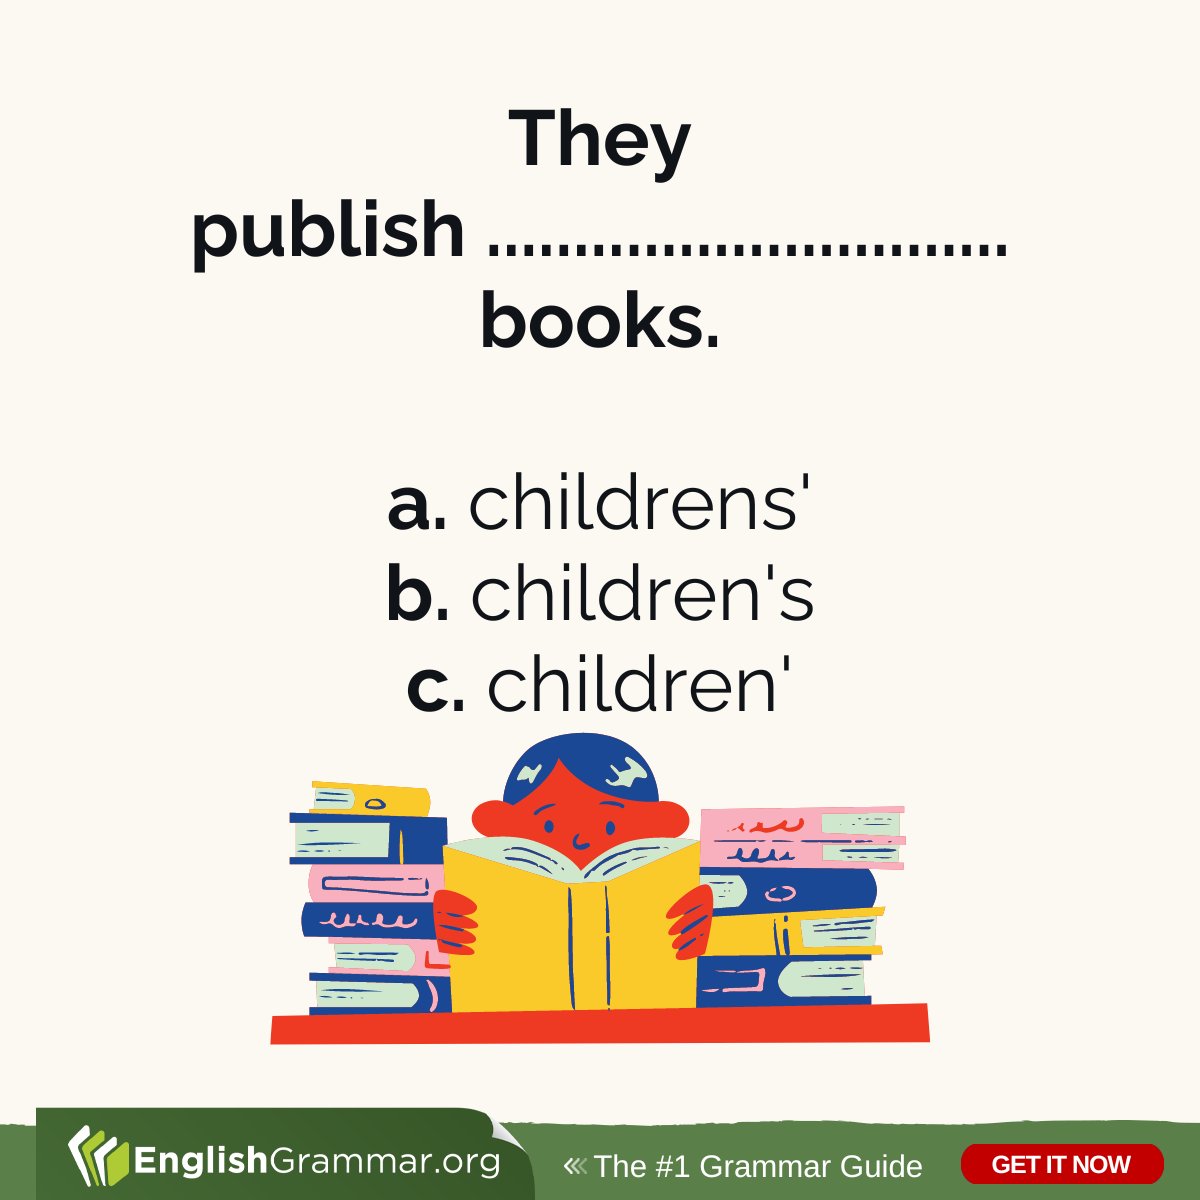 Anyone? Find the right answer here: englishgrammar.org/possessives-a1… #grammar #writing #amwriting